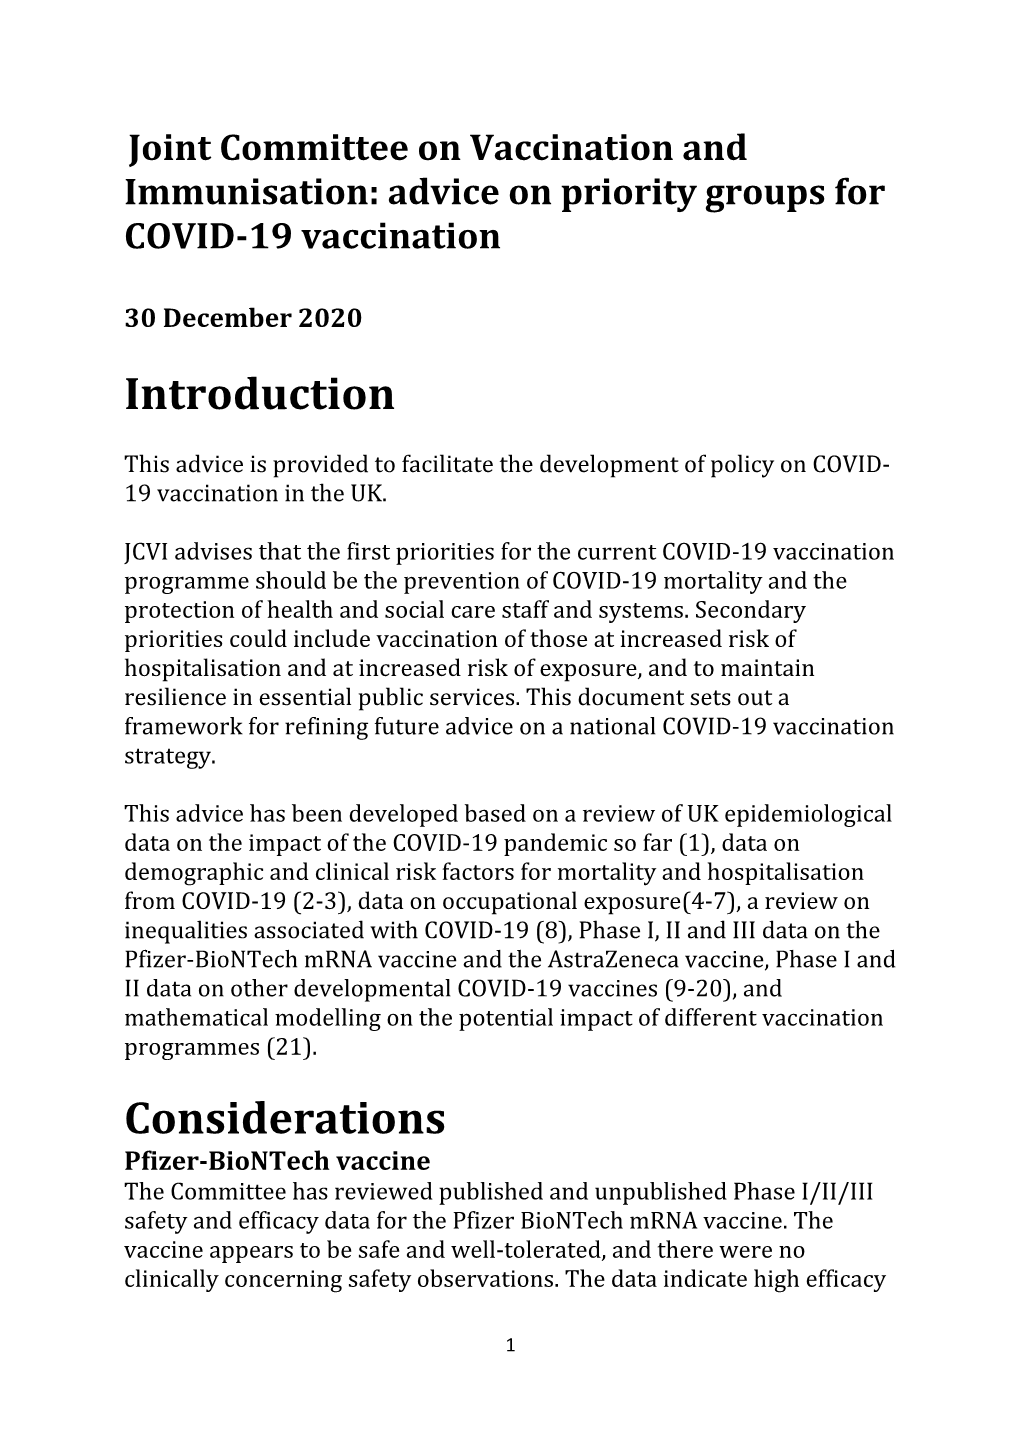 Advice on Priority Groups for COVID-19 Vaccination